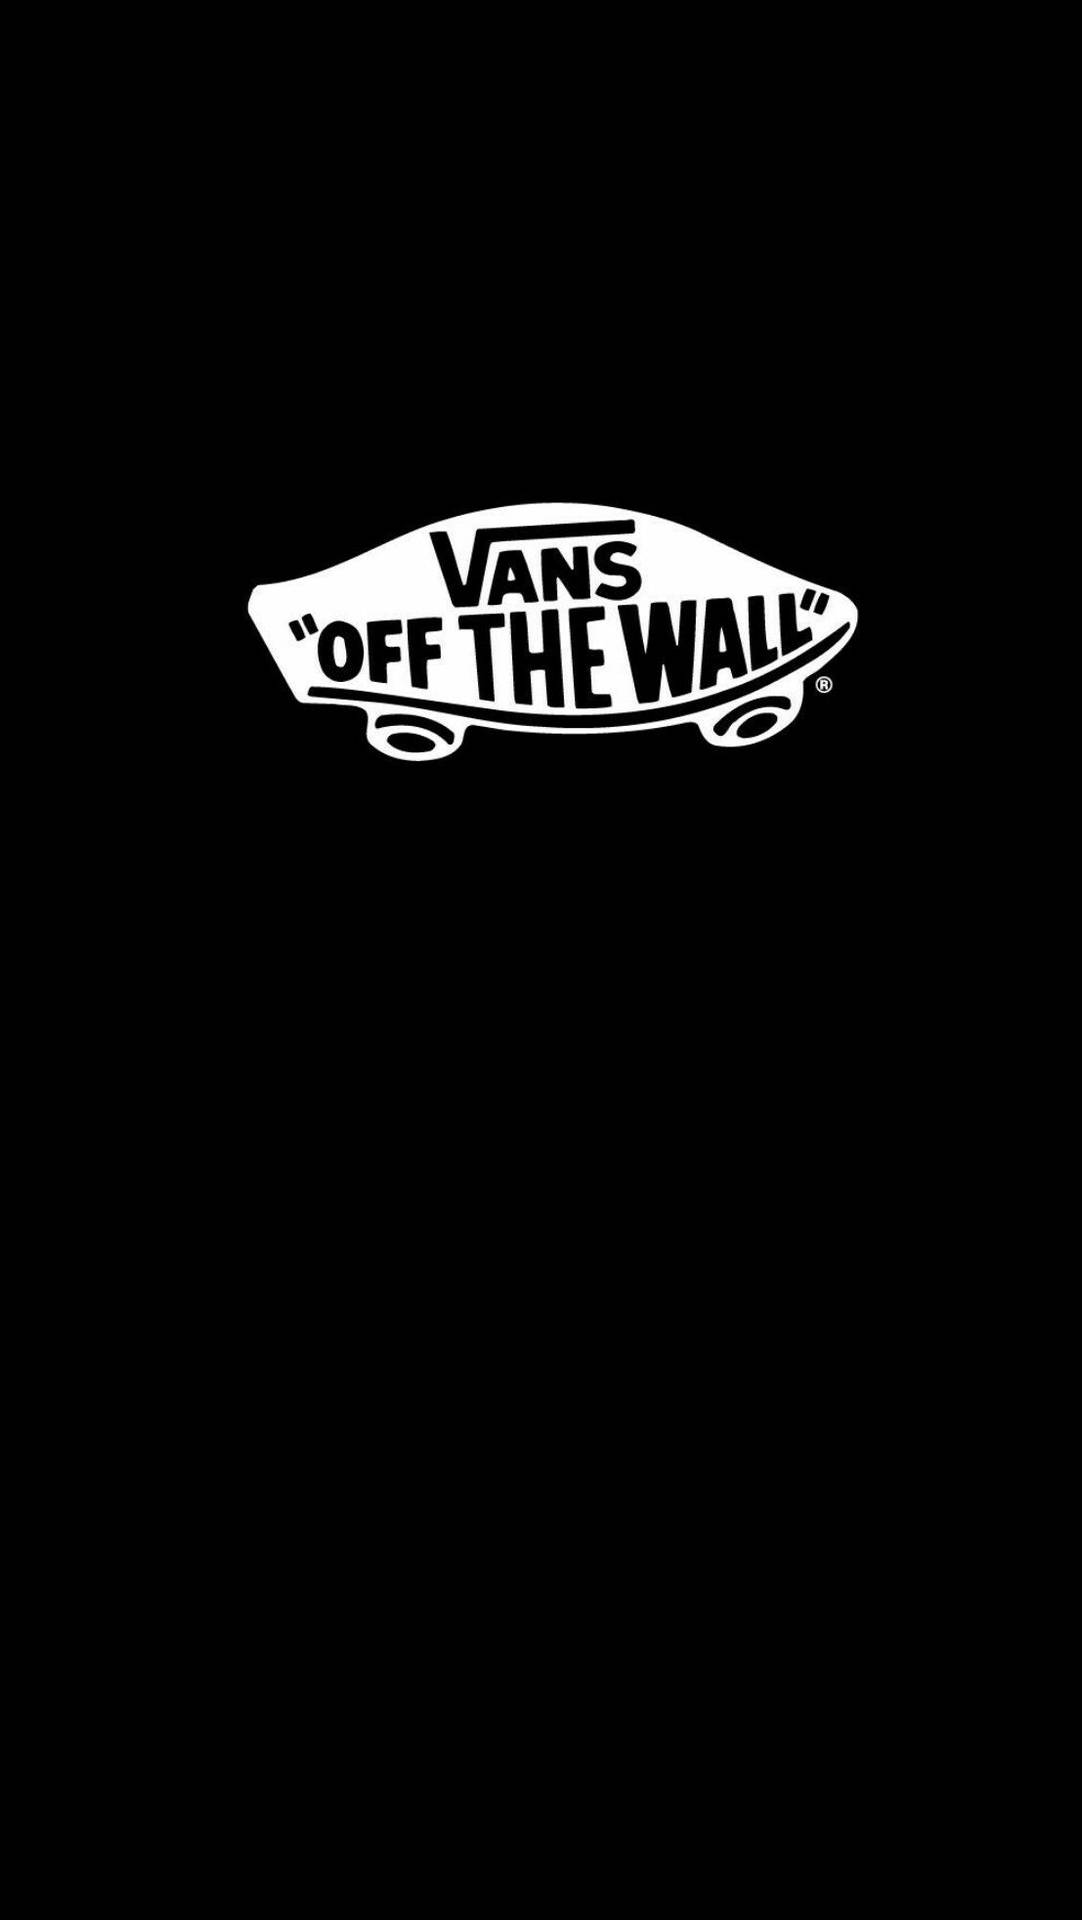 "Take the road less traveled with Vans Off-the-Wall!" Wallpaper